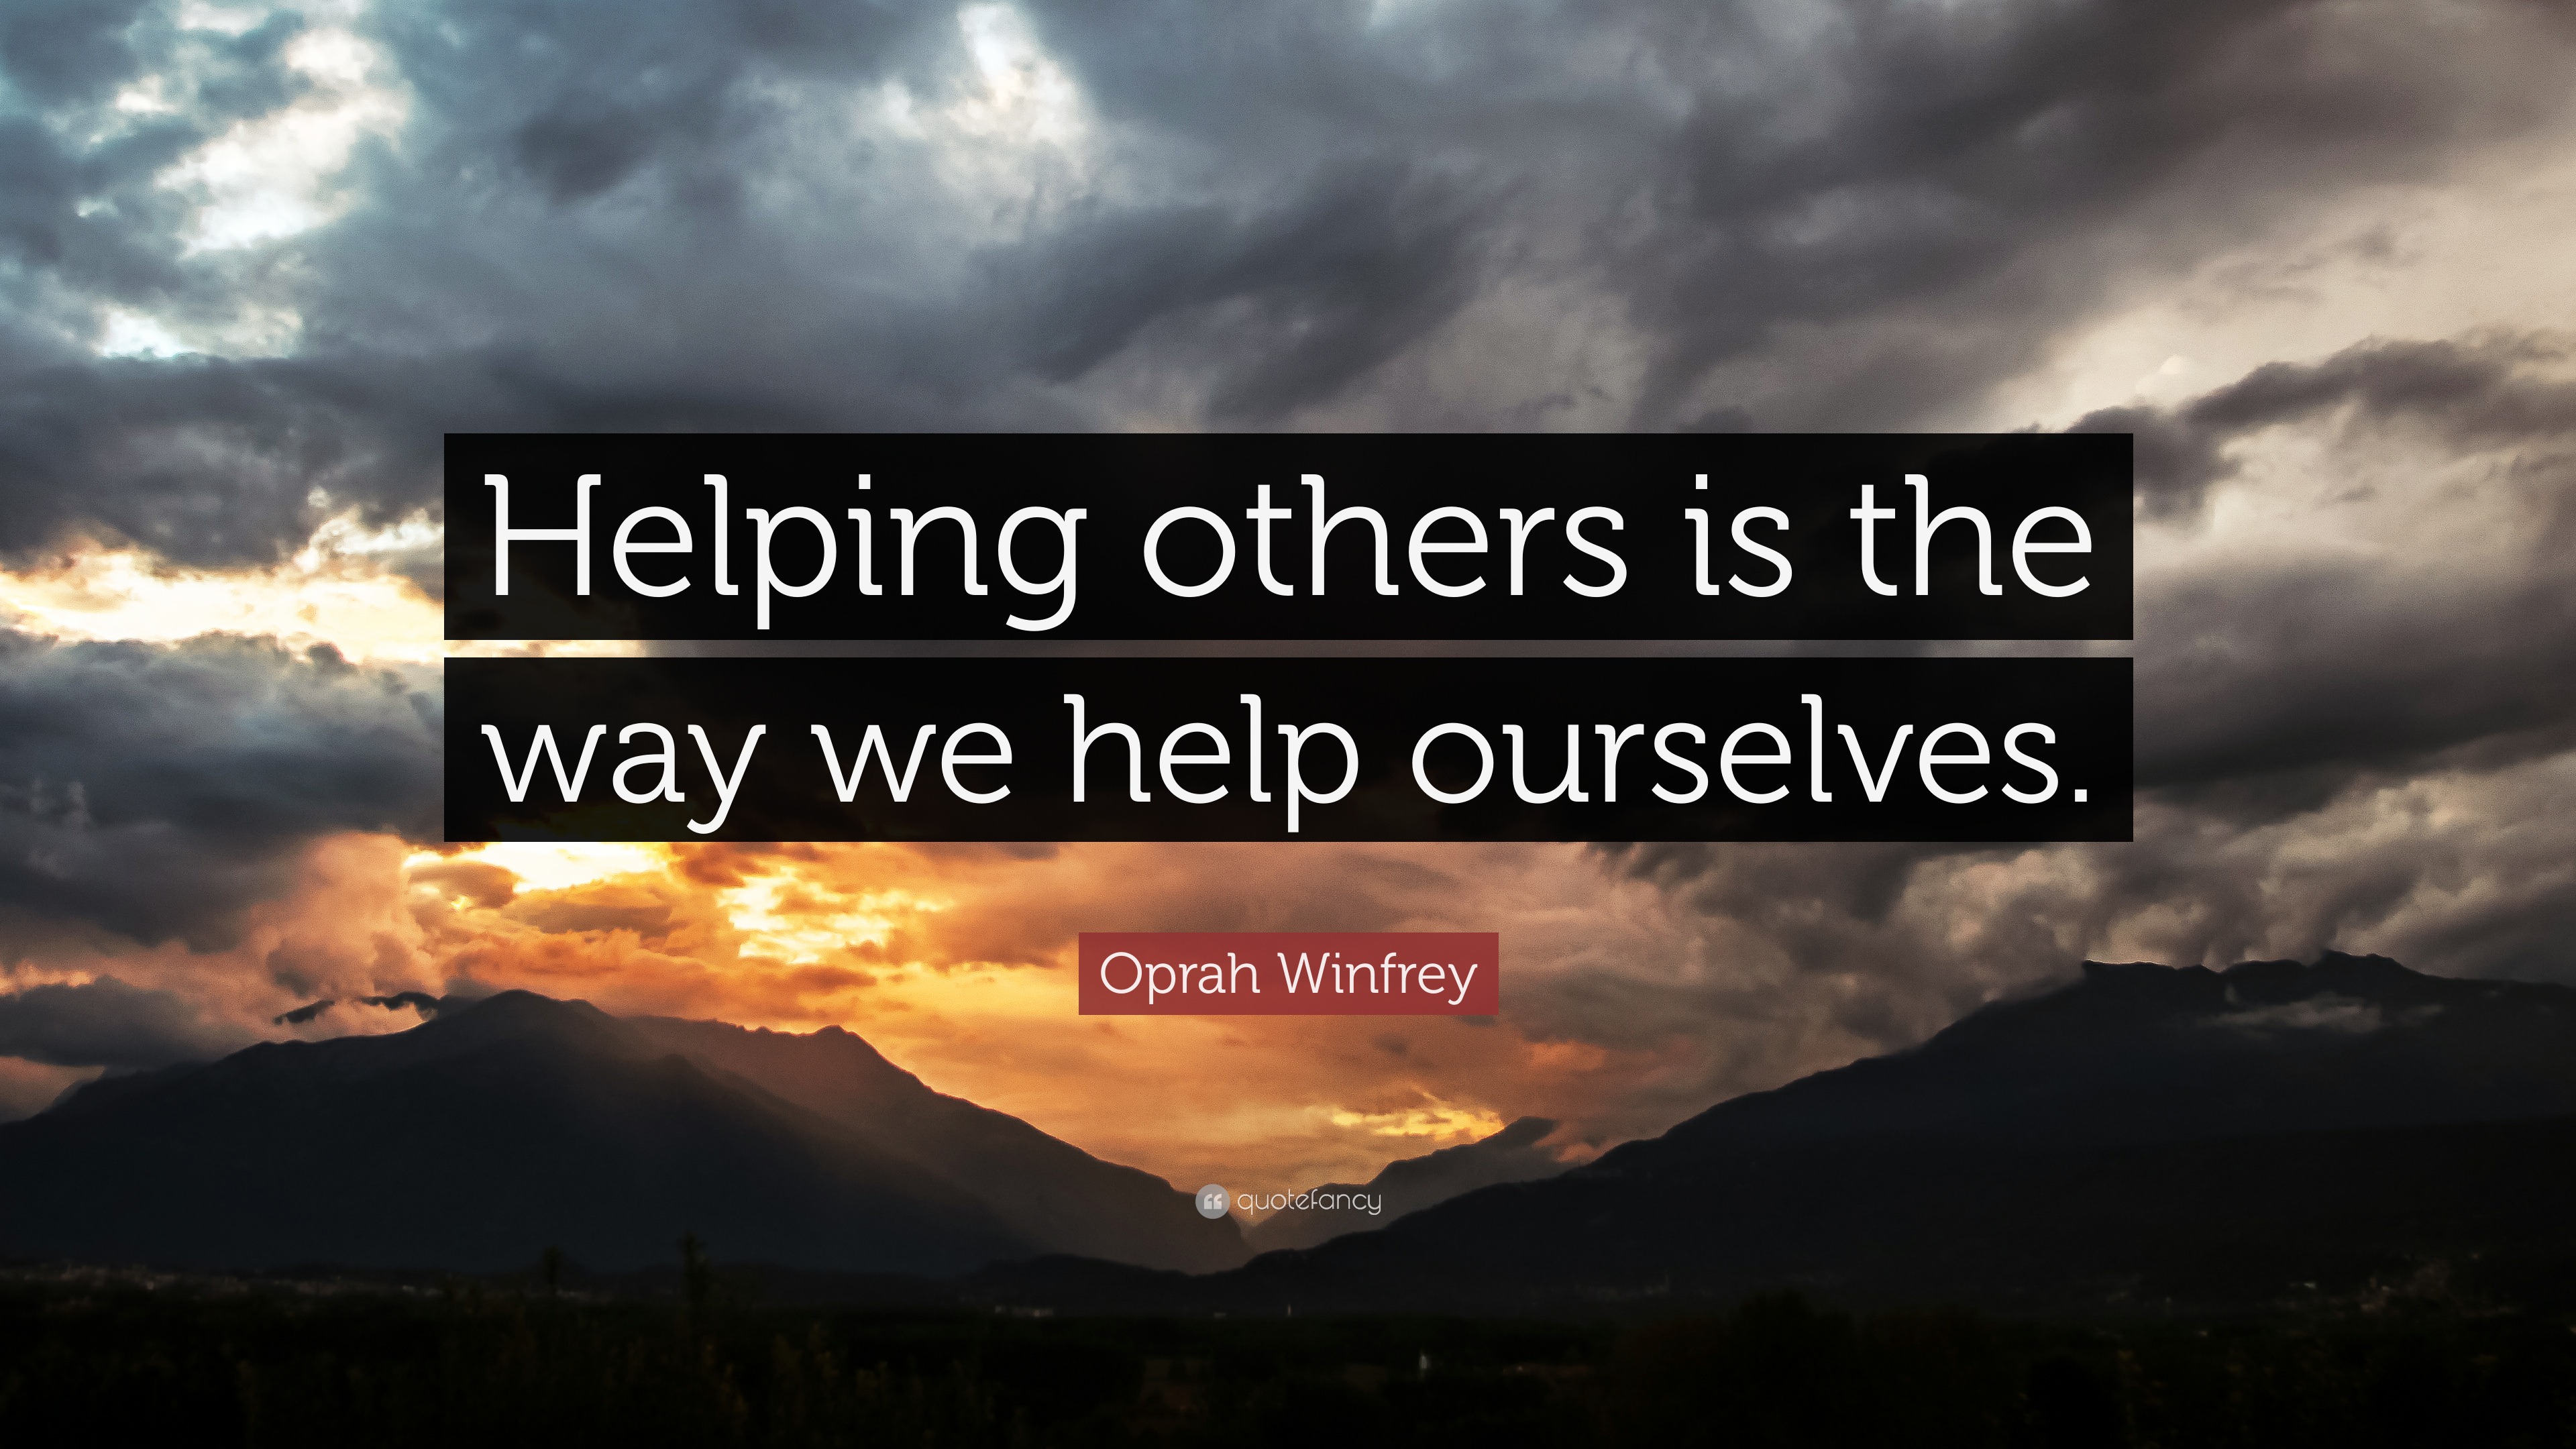 4681982 Oprah Winfrey Quote Helping Others Is The Way We Help Ourselves 